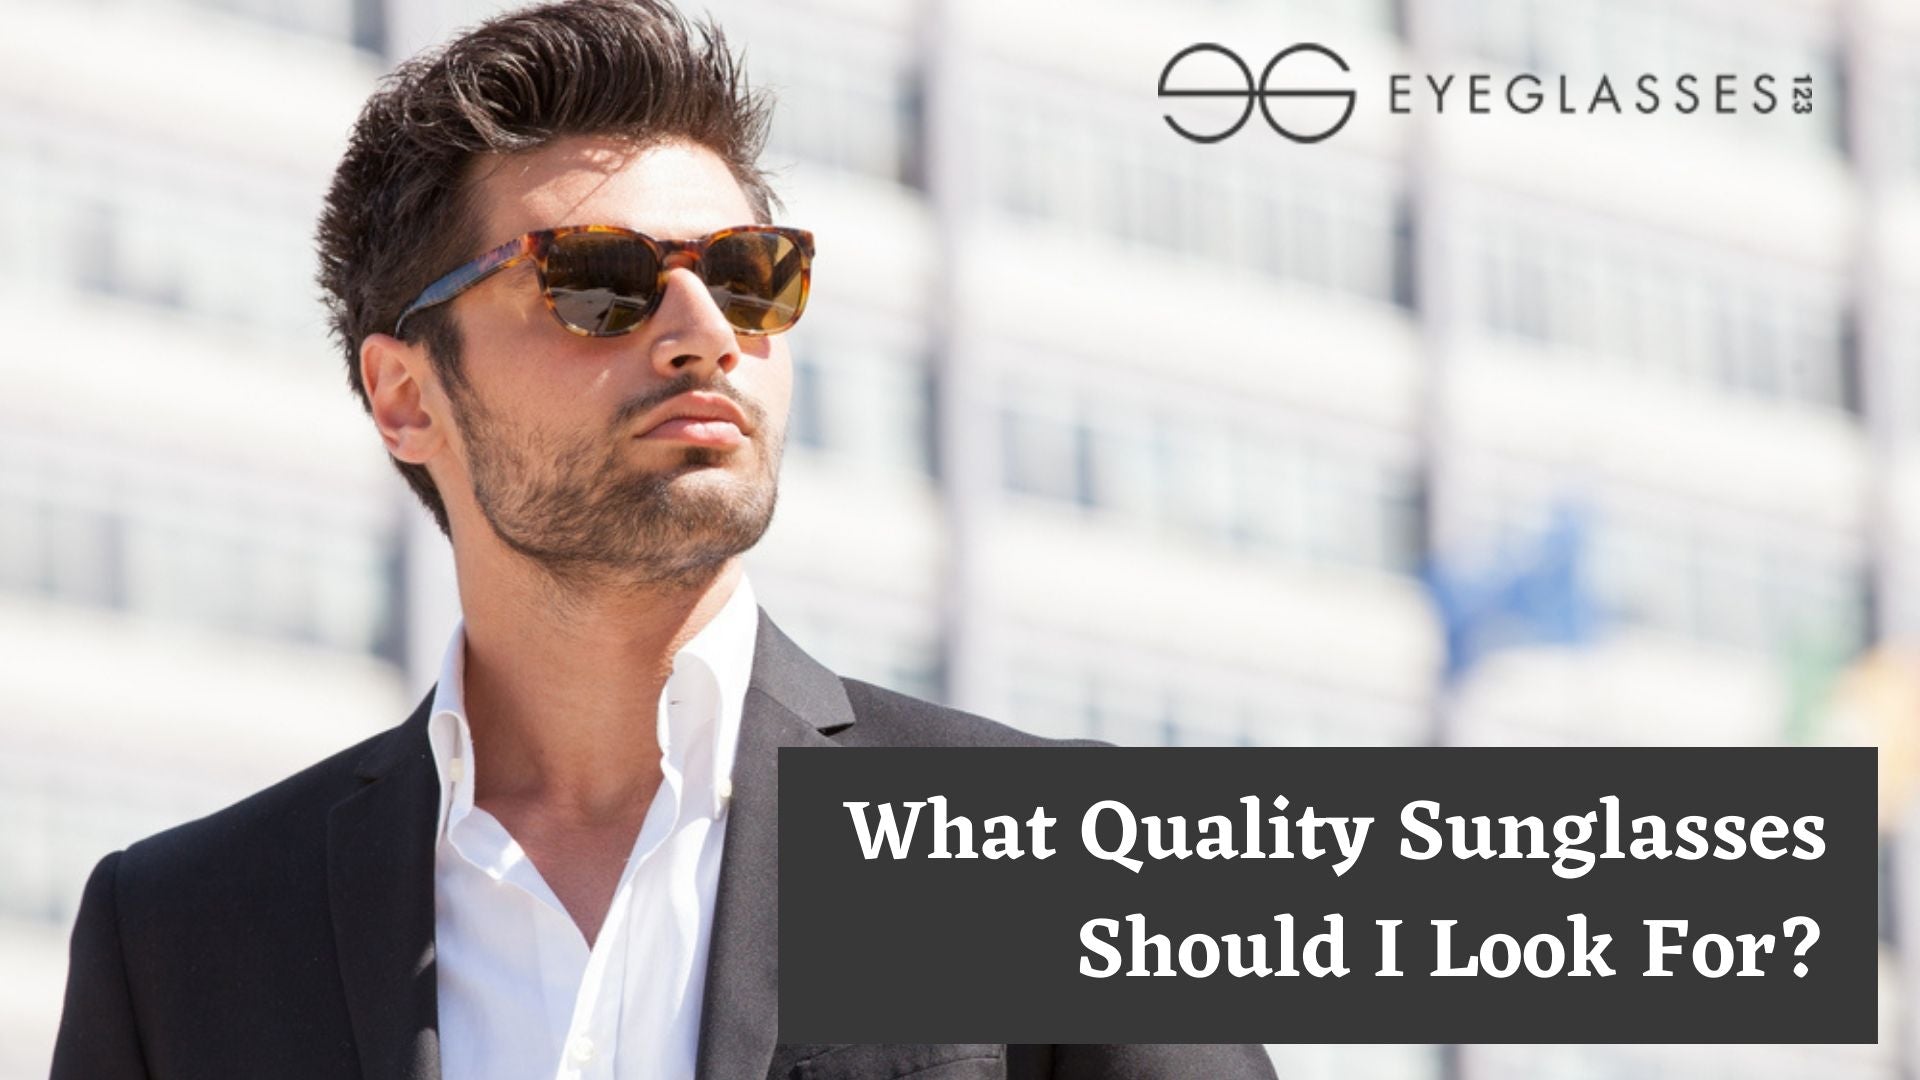 What Quality Sunglasses Should I Look For